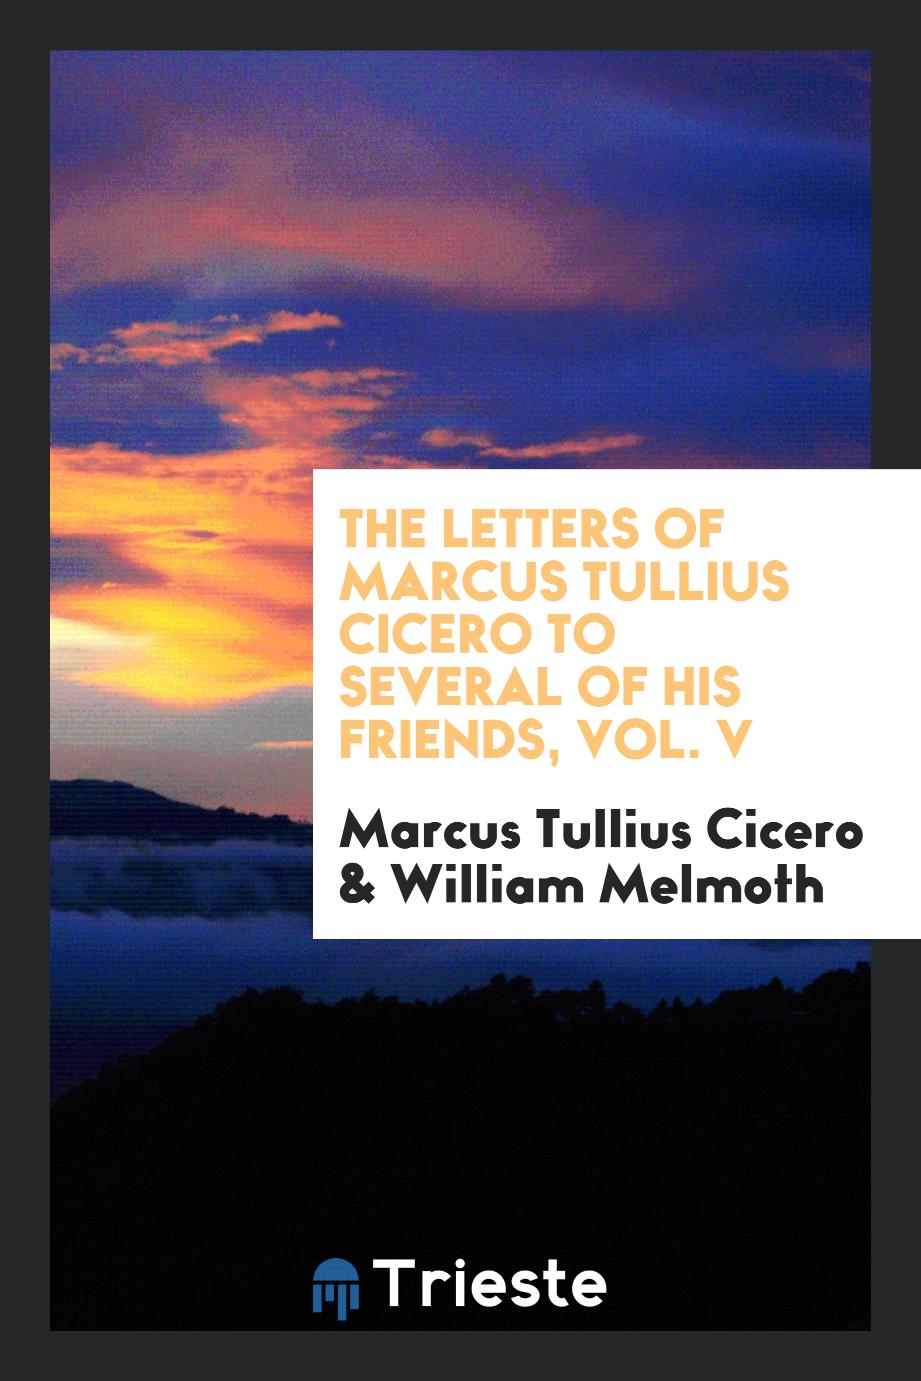 The letters of Marcus Tullius Cicero to several of his friends, Vol. V